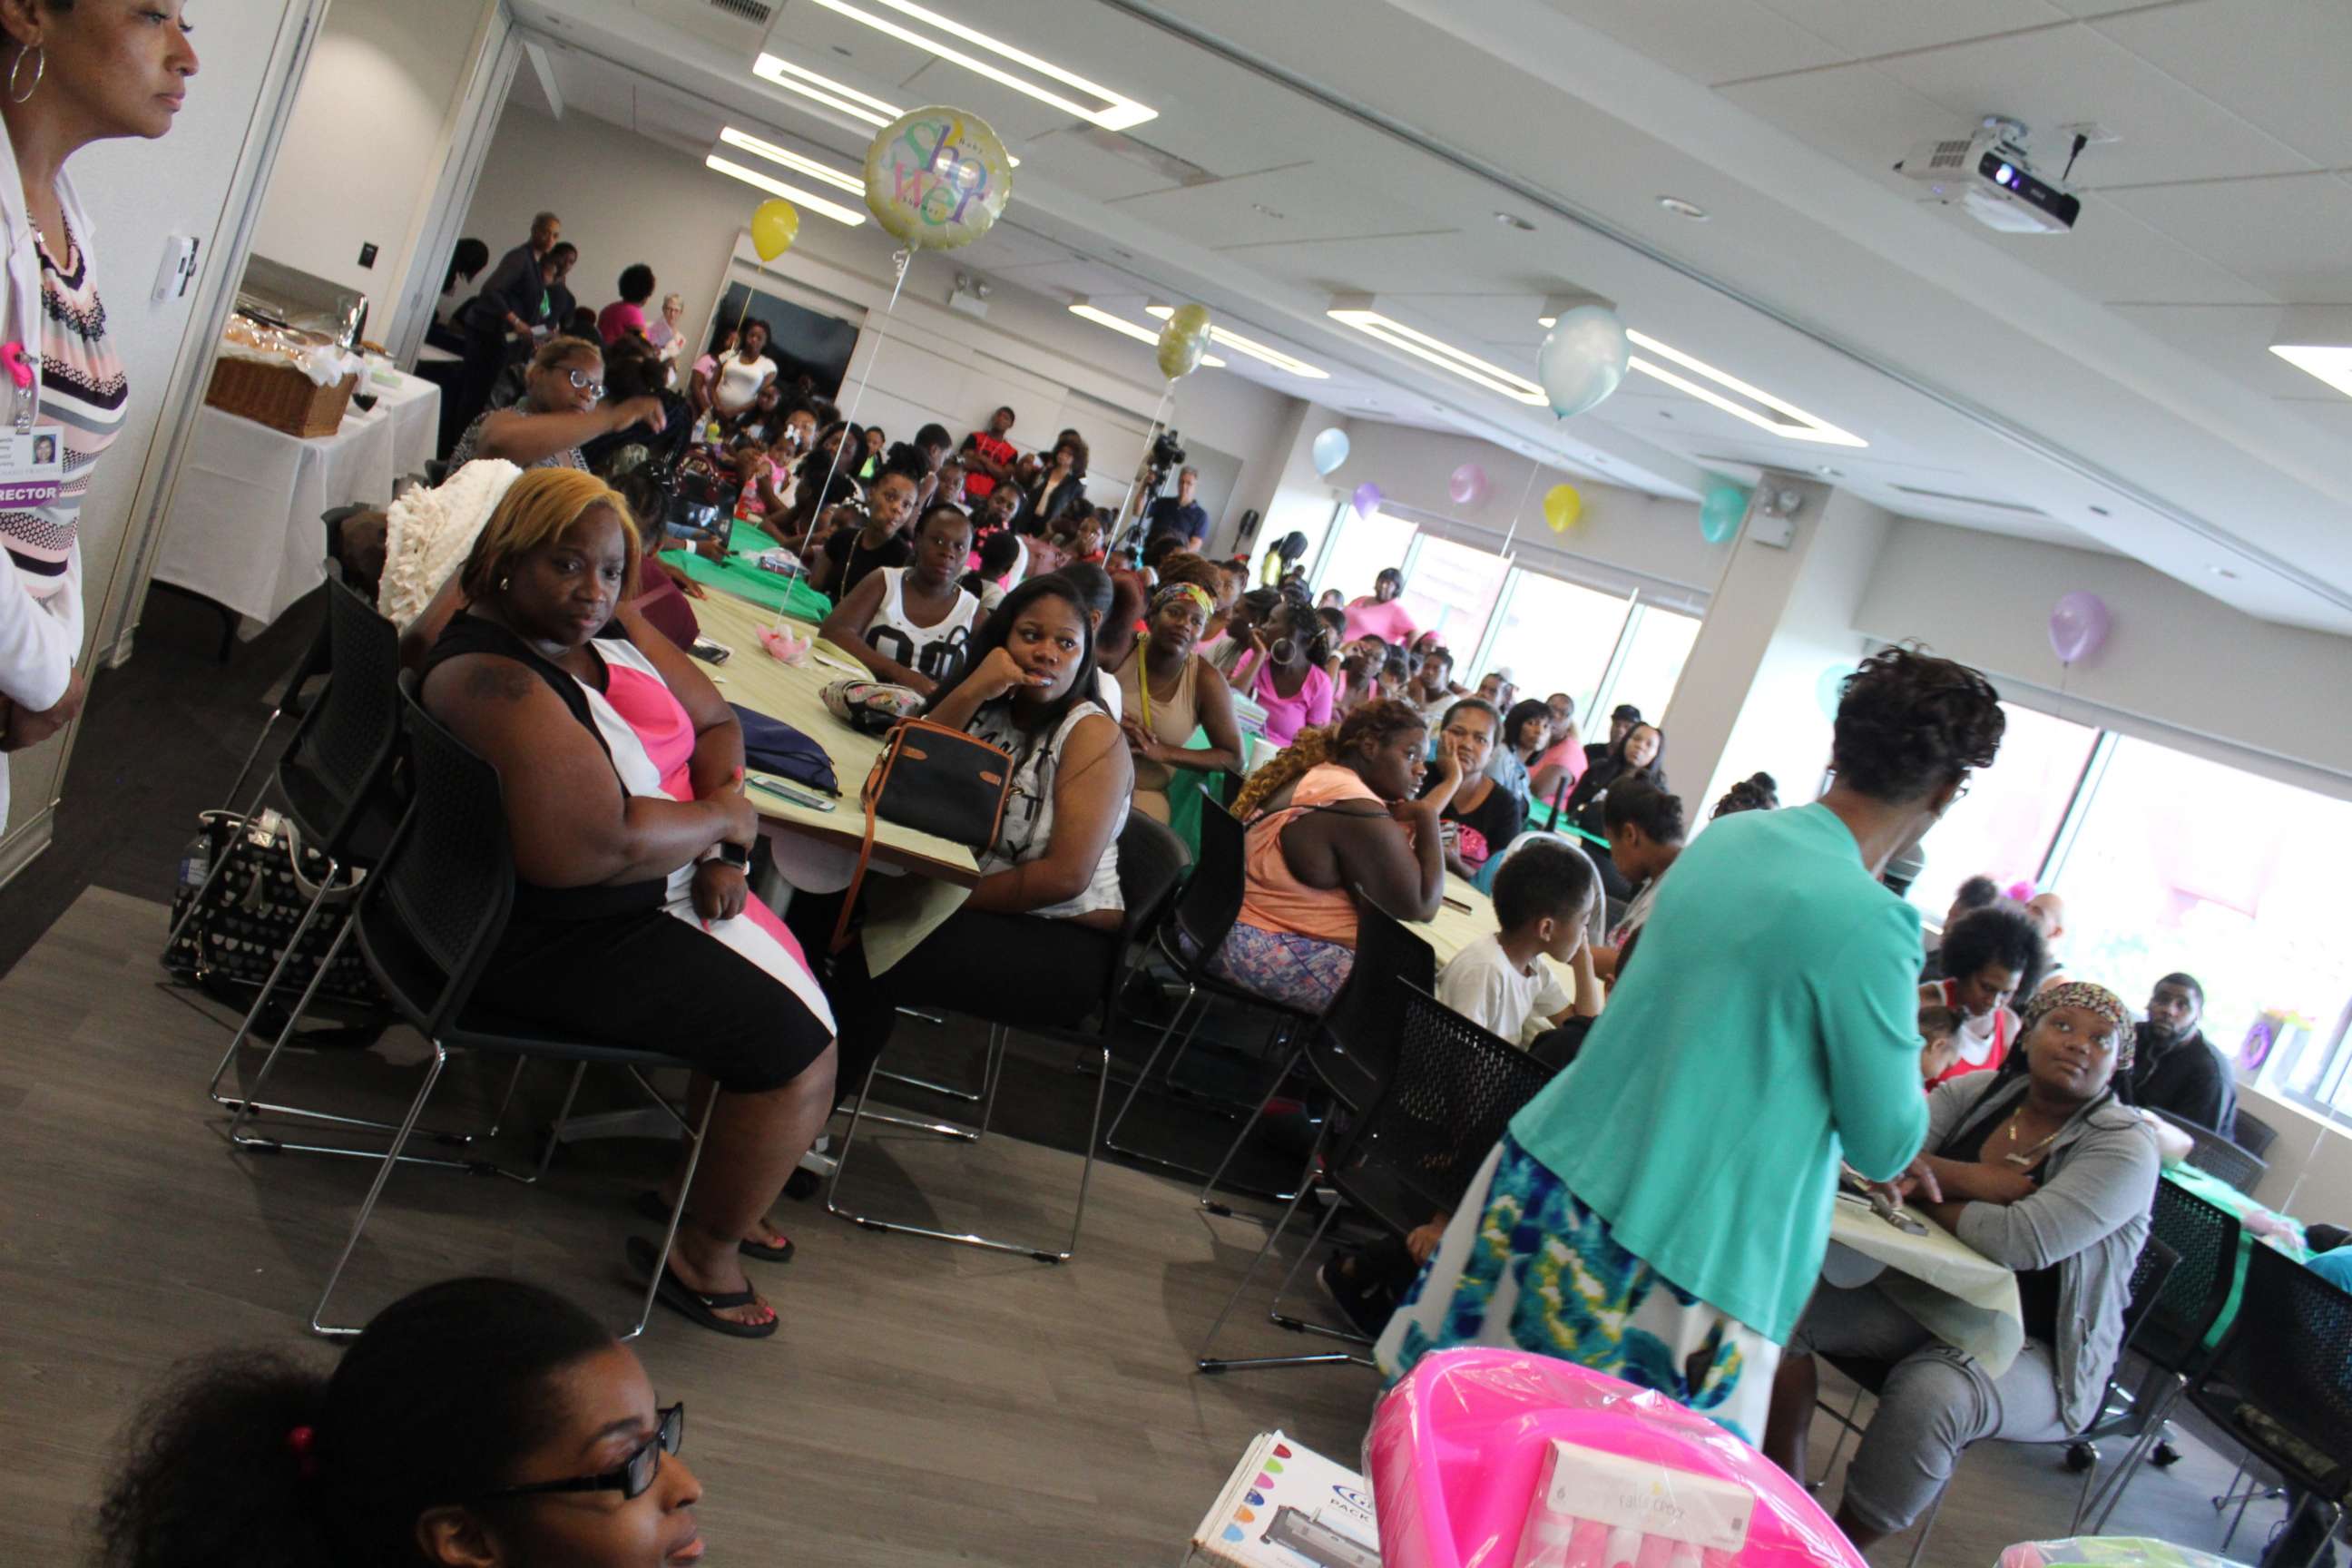 PHOTO: More than 100 women and men attended the 2018 St. Bernard Hospital Community Baby Shower.